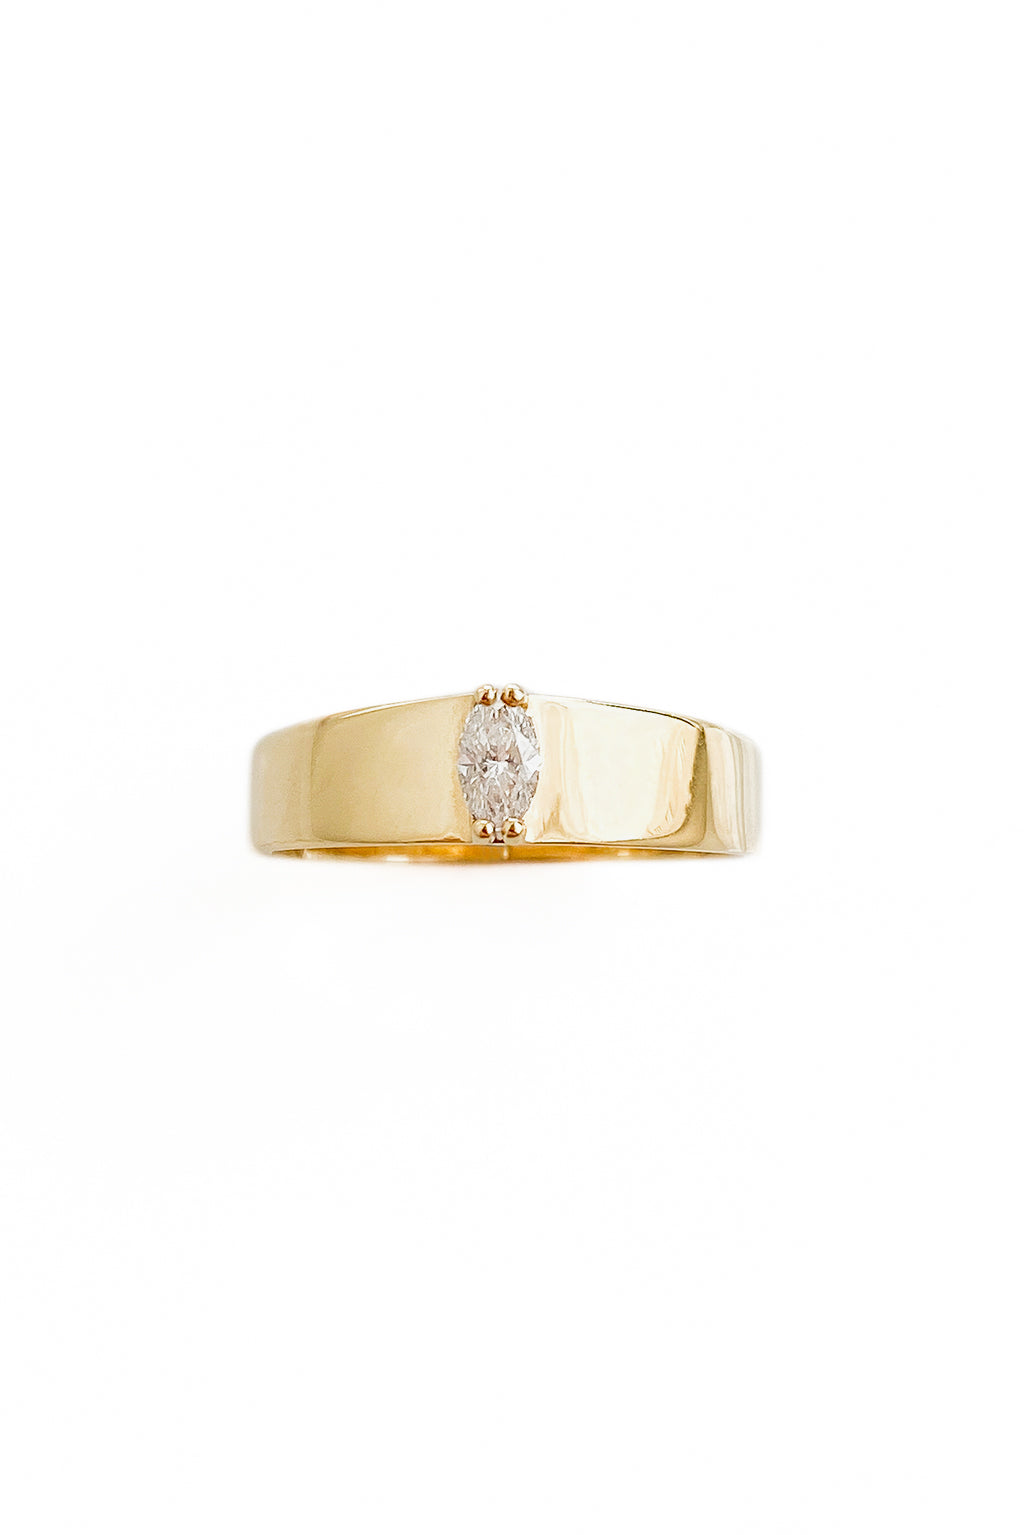 Band marquise 5 x 2'5 mm gold ring